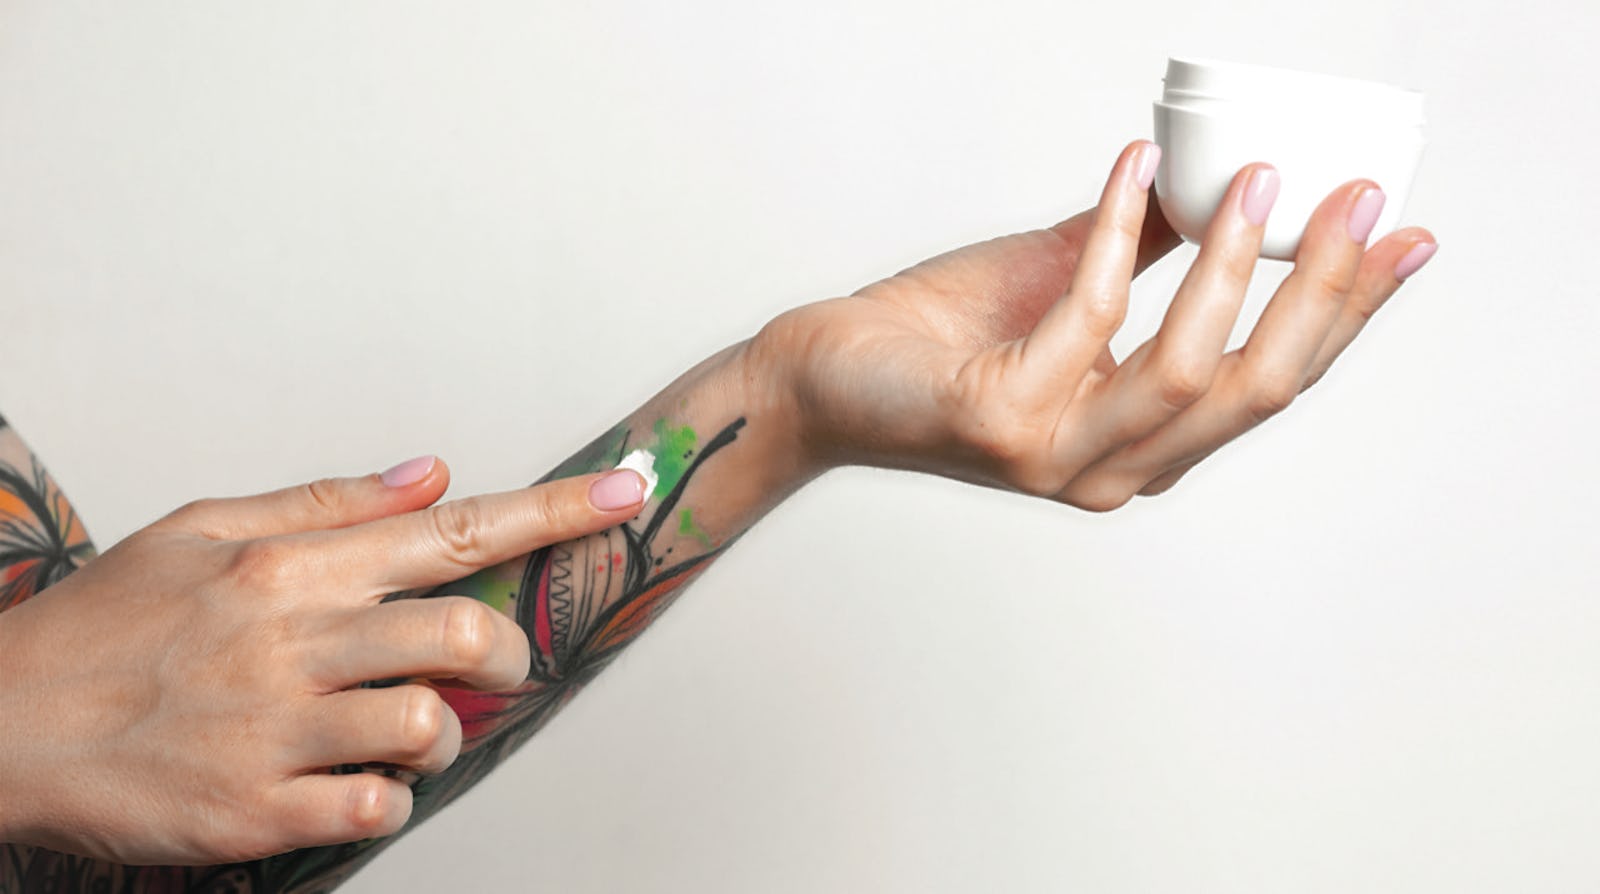 1. How to Use Aquaphor for Tattoo Aftercare - wide 3